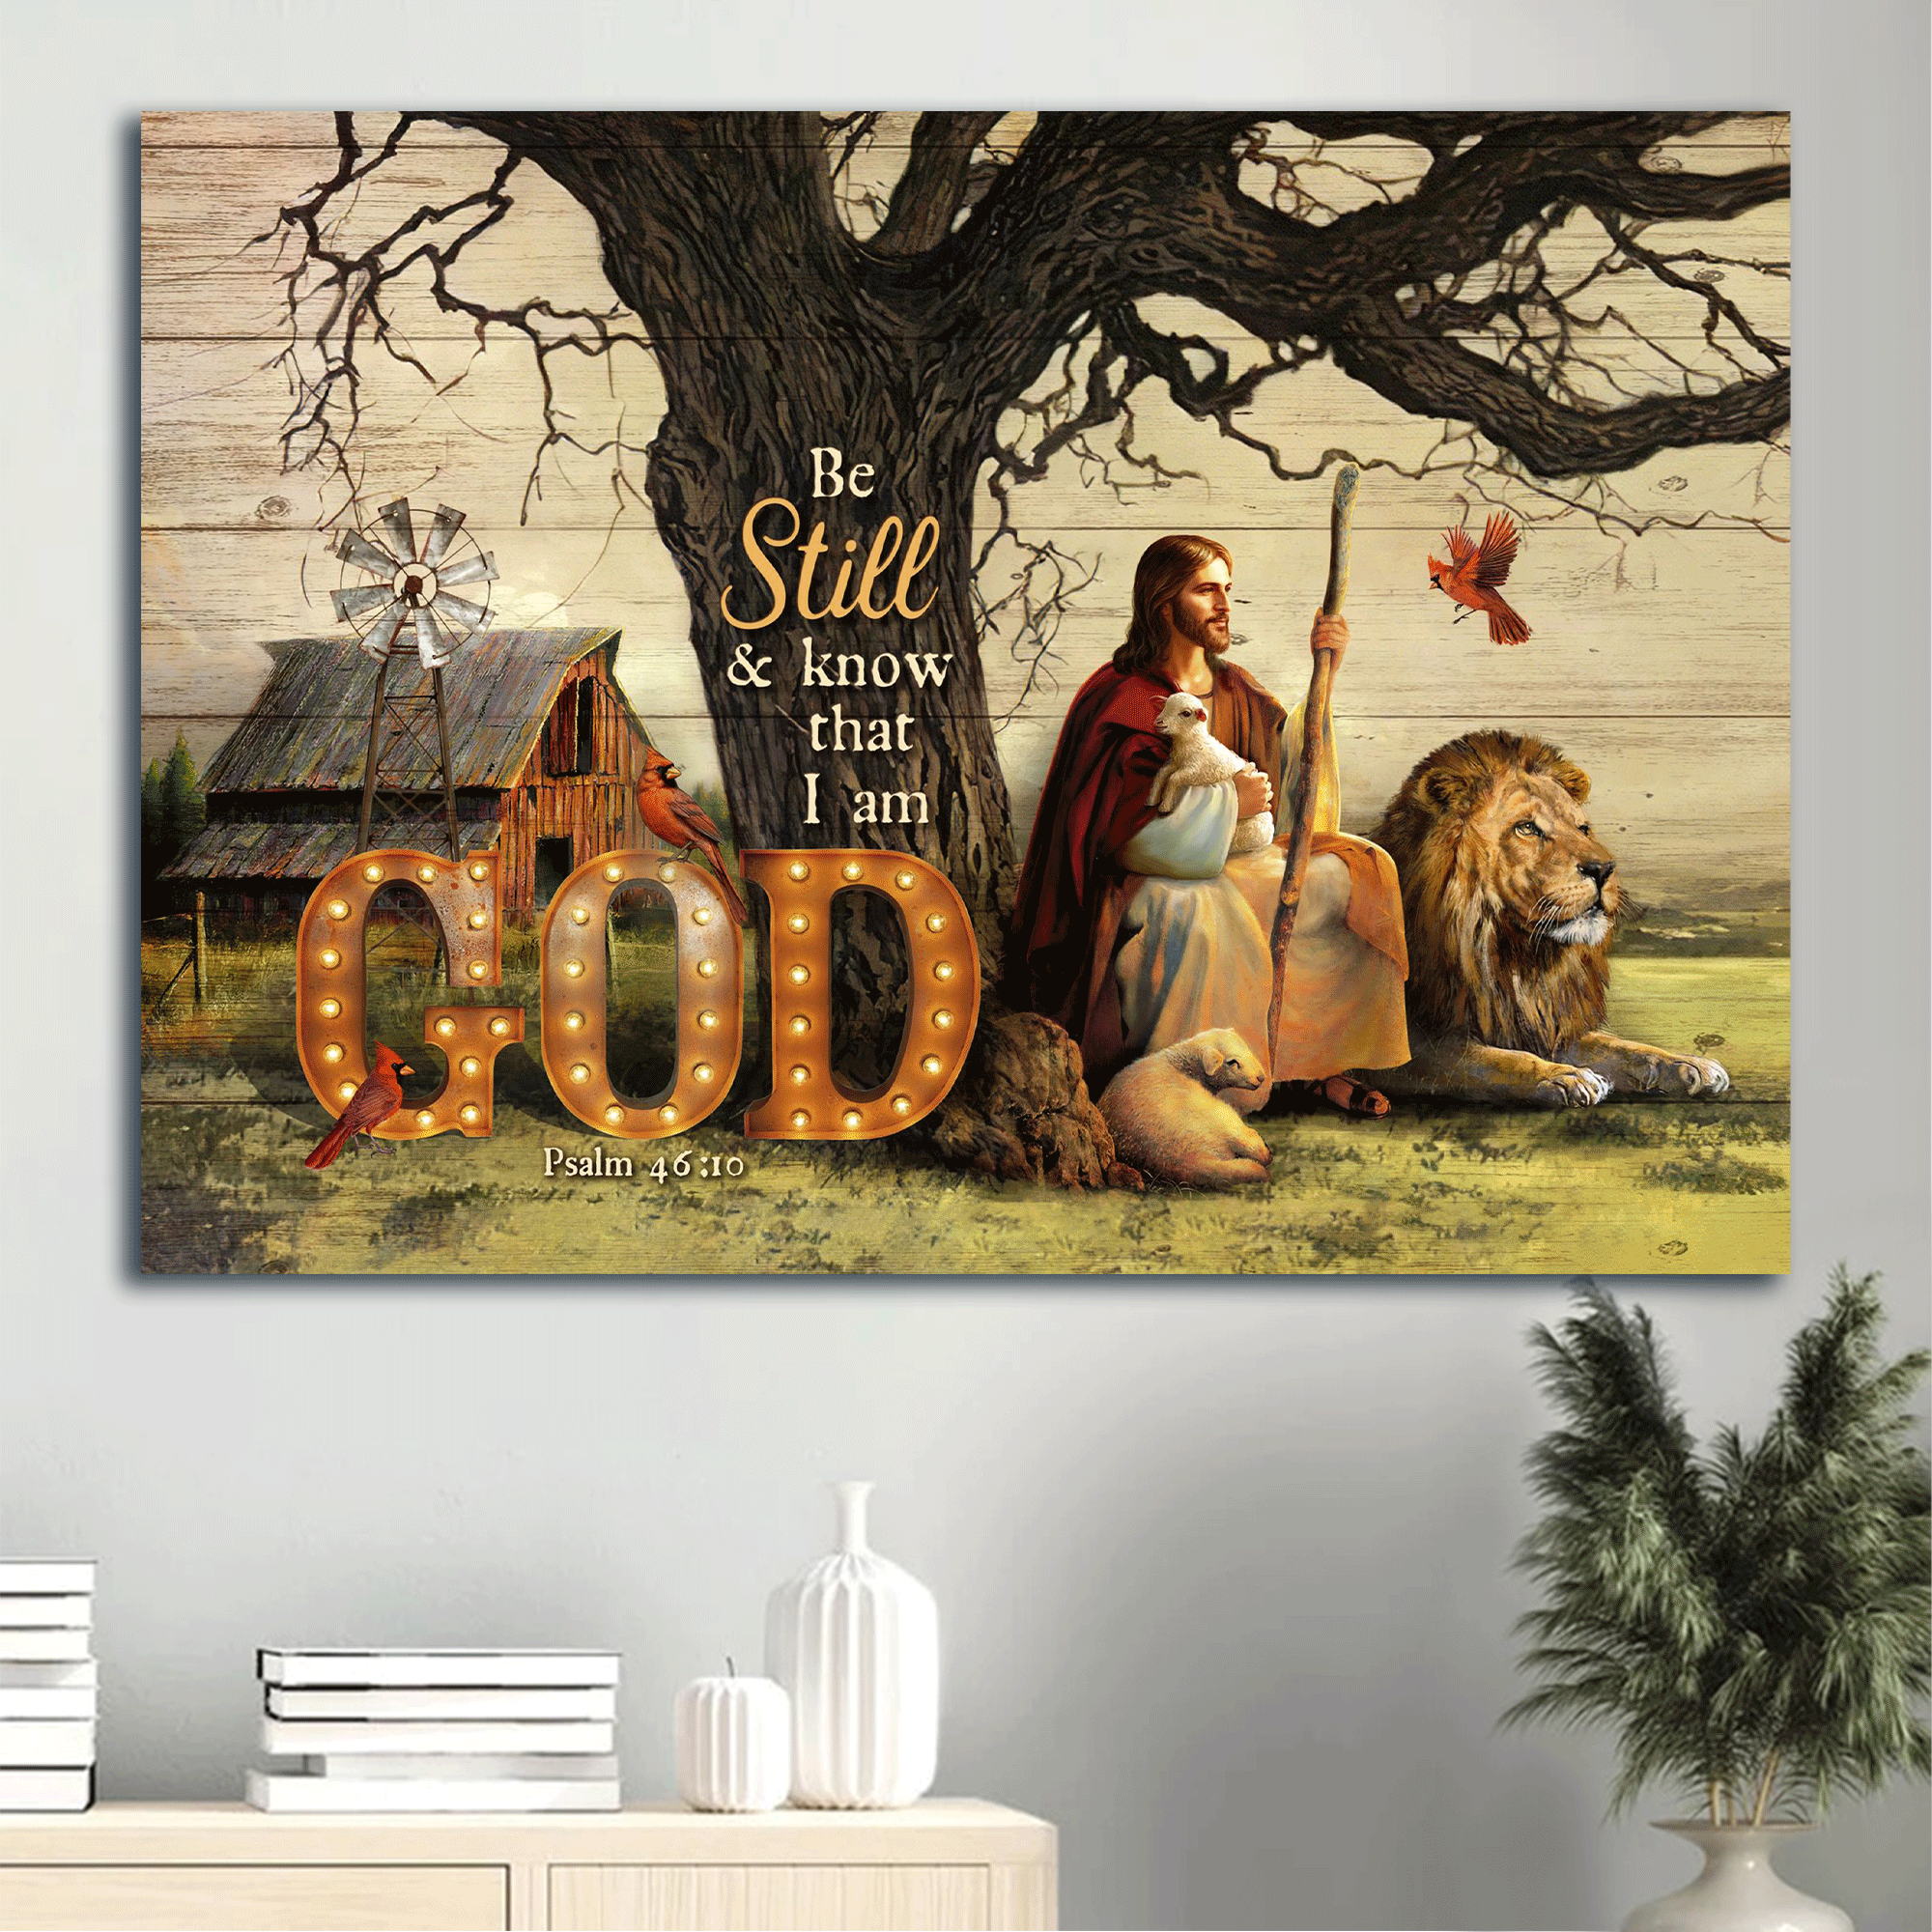 Jesus Landscape Canvas - Lion of Judah, Lamb of God, Red cardinal Canvas - Gift for Christian - Be still and know that I am God Landscape Canvas